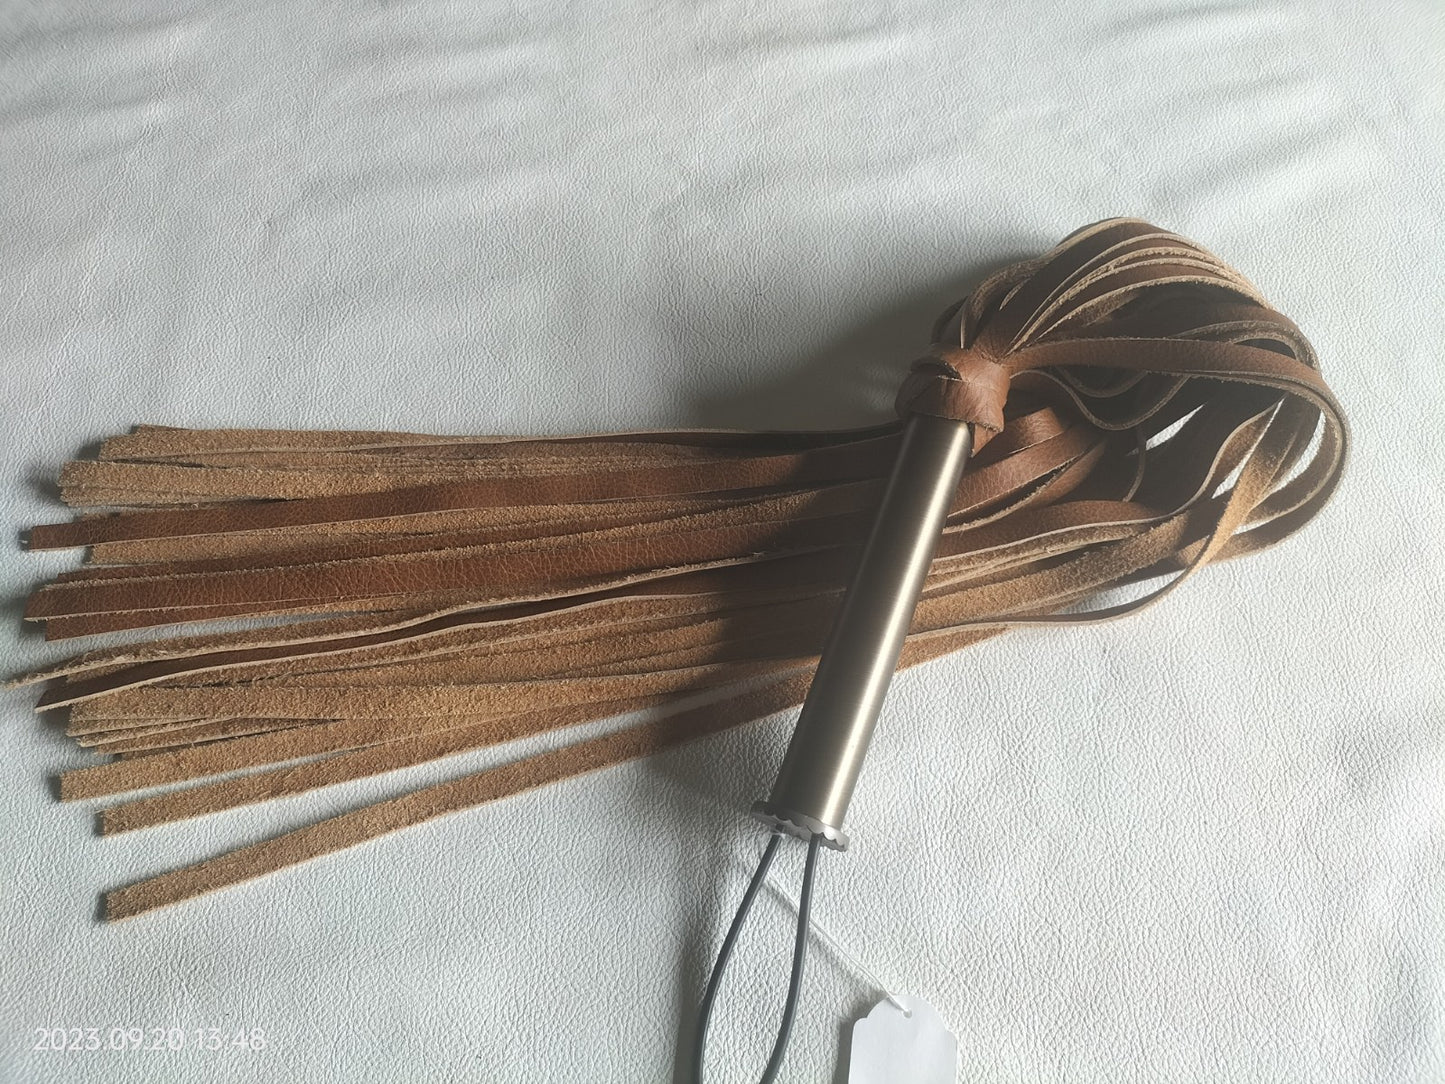 Cognac buffalo leather flogger 70cm with bronze-colored handle